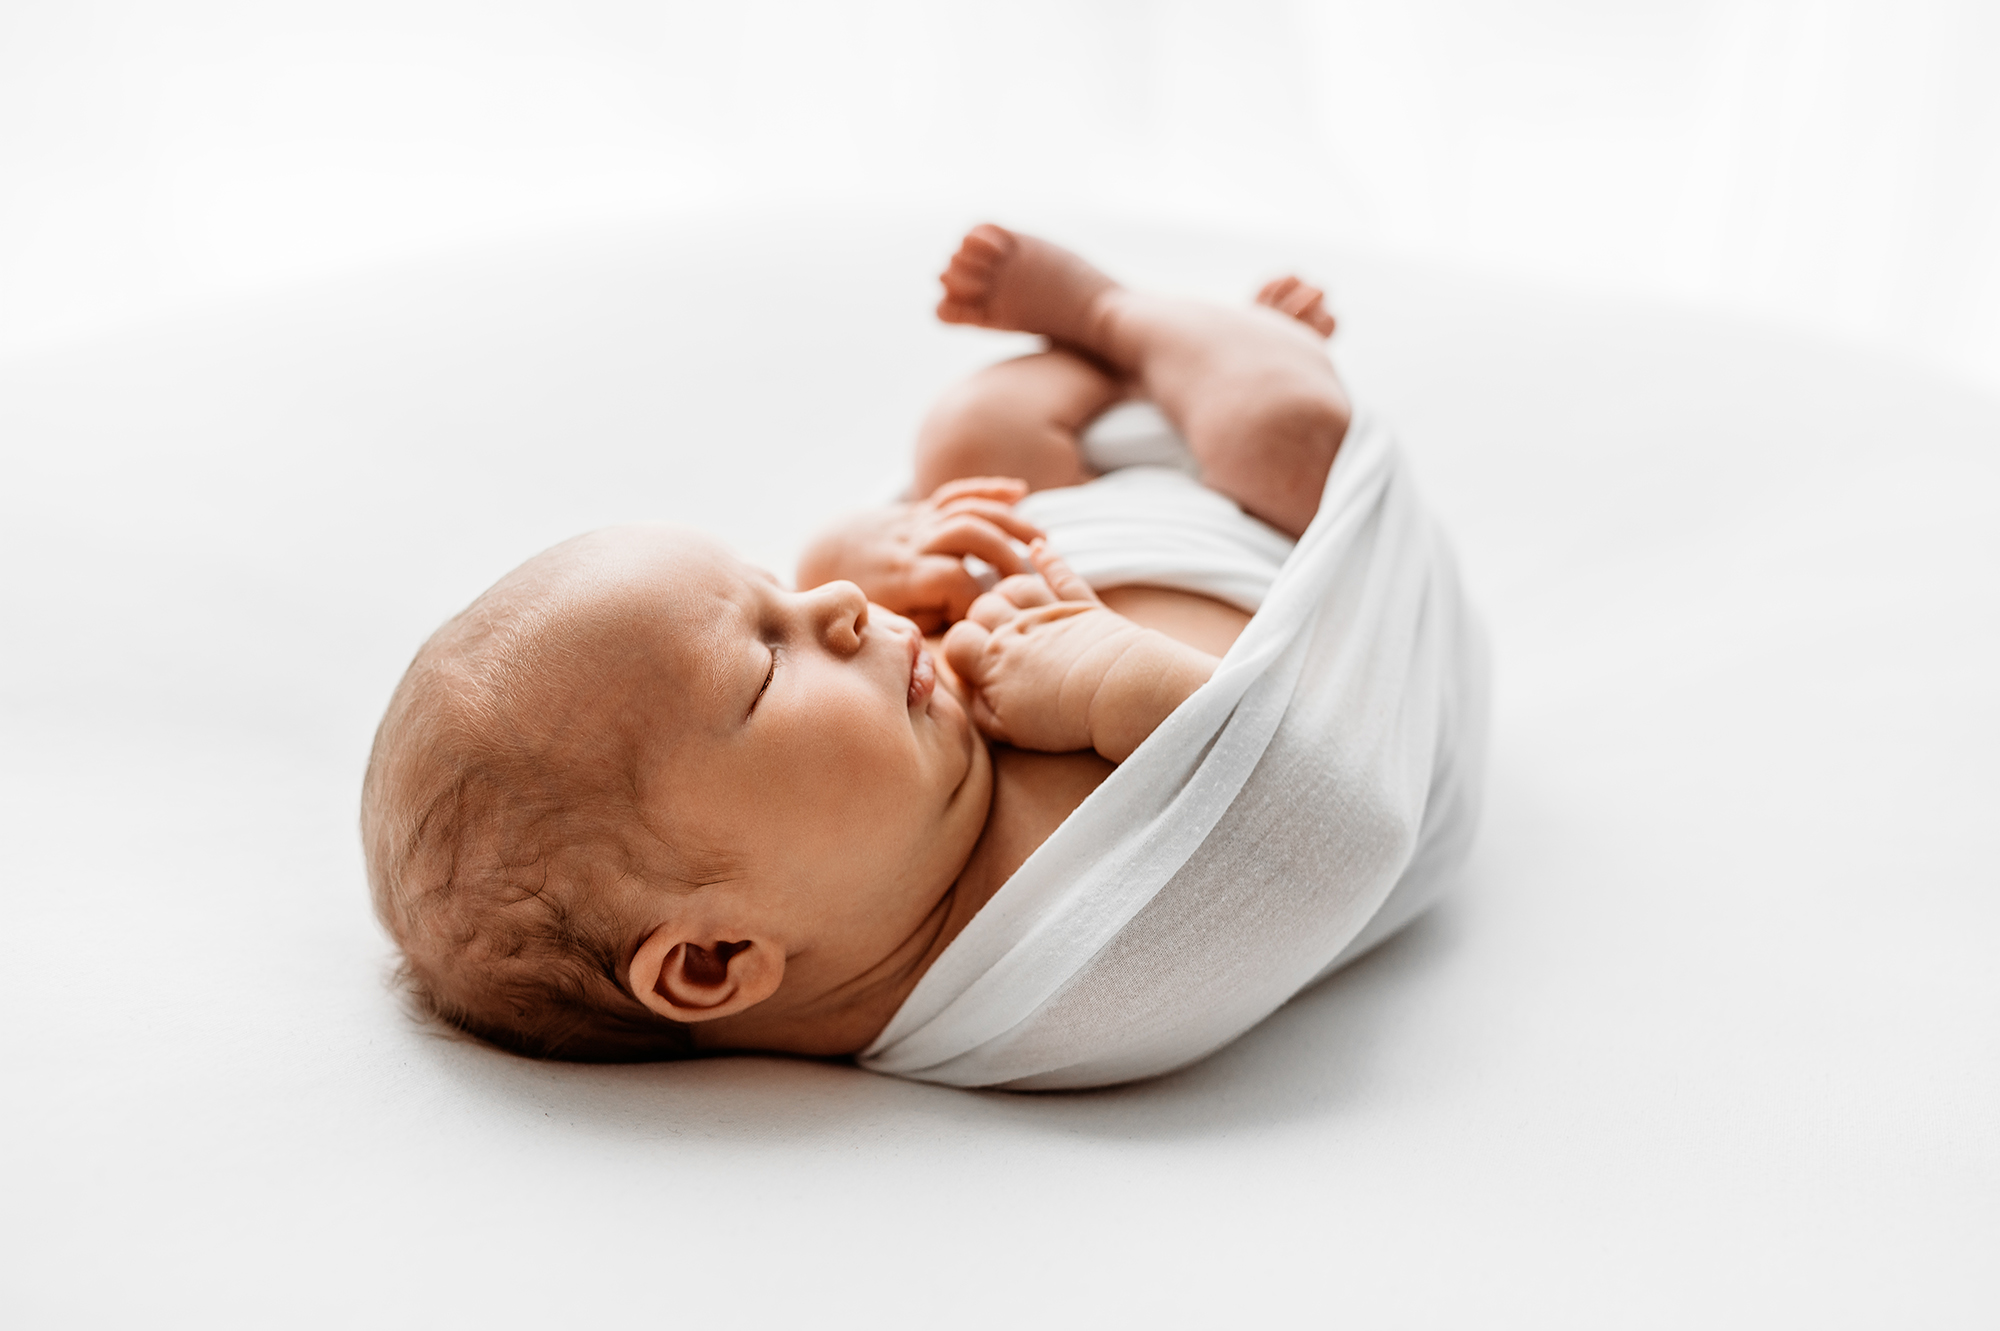 Barnsley newborn photographer, baby wrapped up in a wrap 